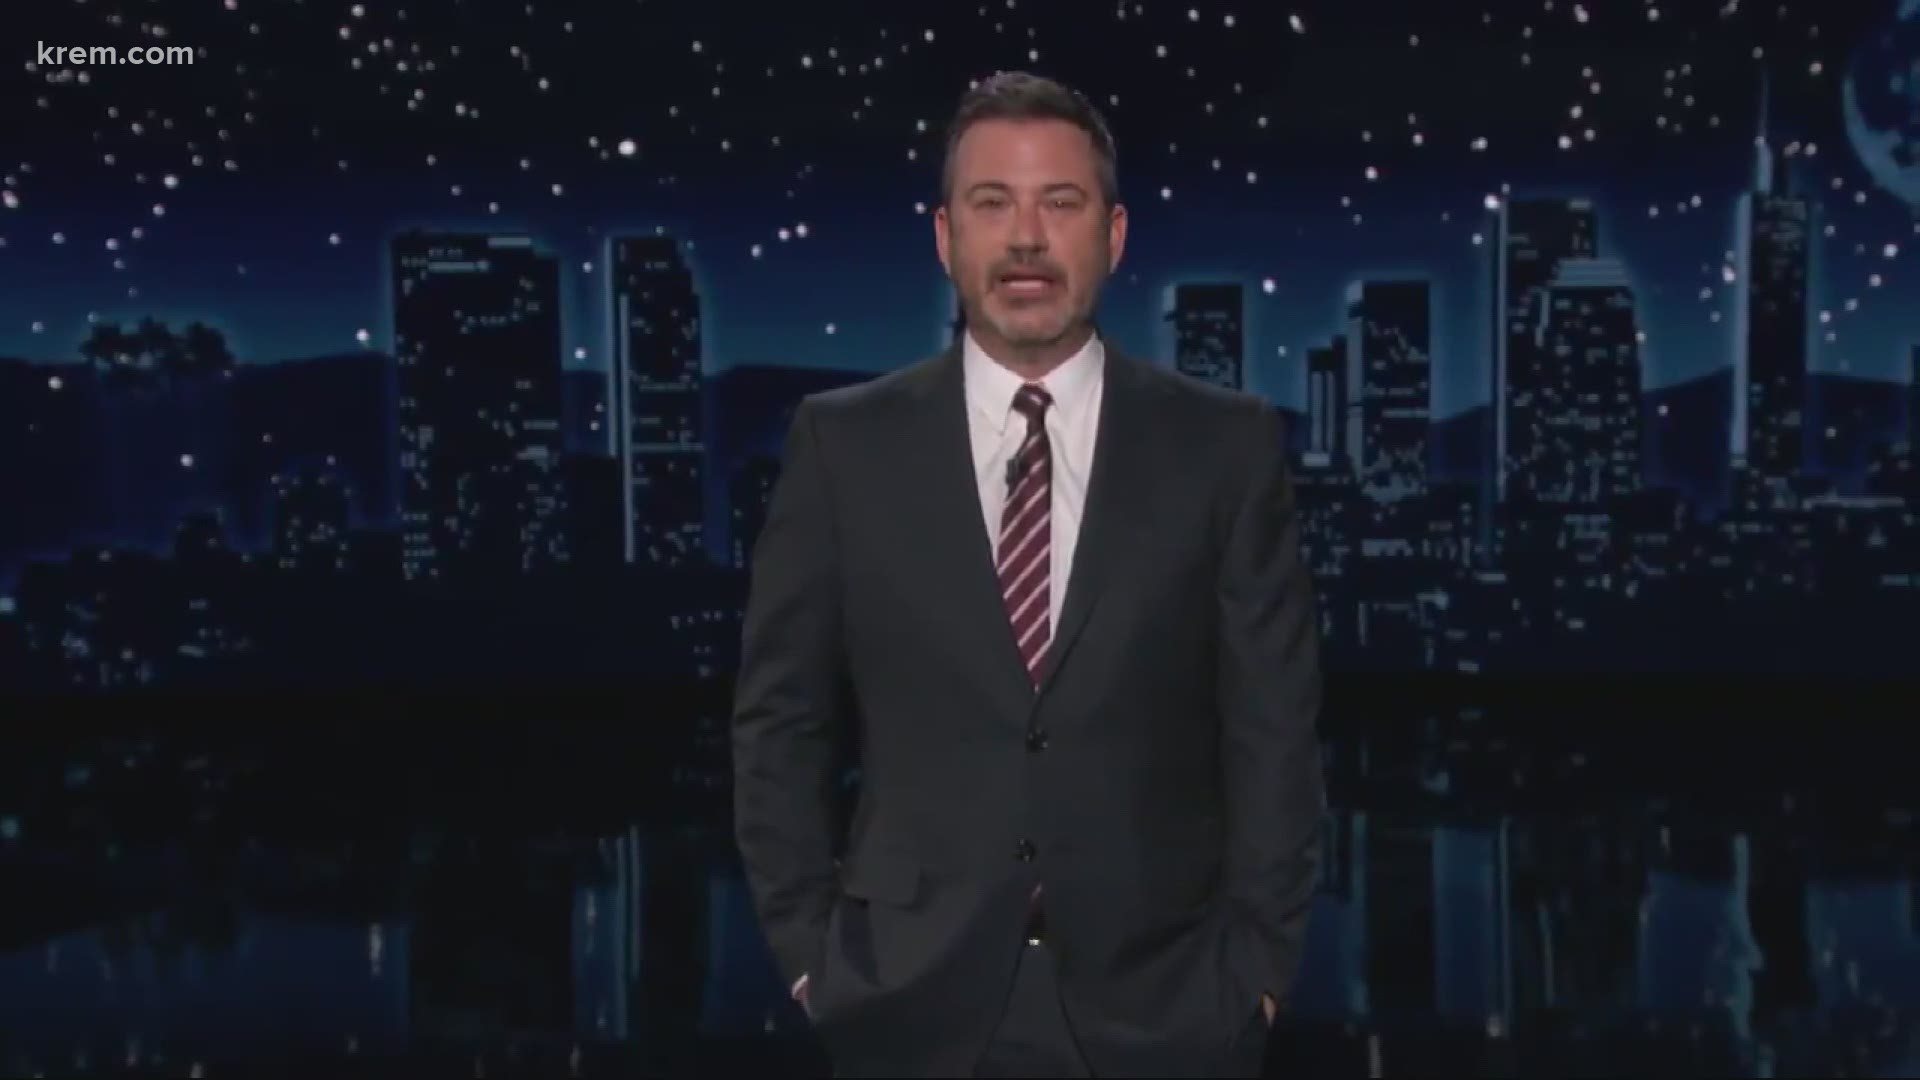 Gonzaga's undefeated regular season and historic NCAA Tournament run haven't been enough to convince Jimmy Kimmel that Gonzaga is a real university